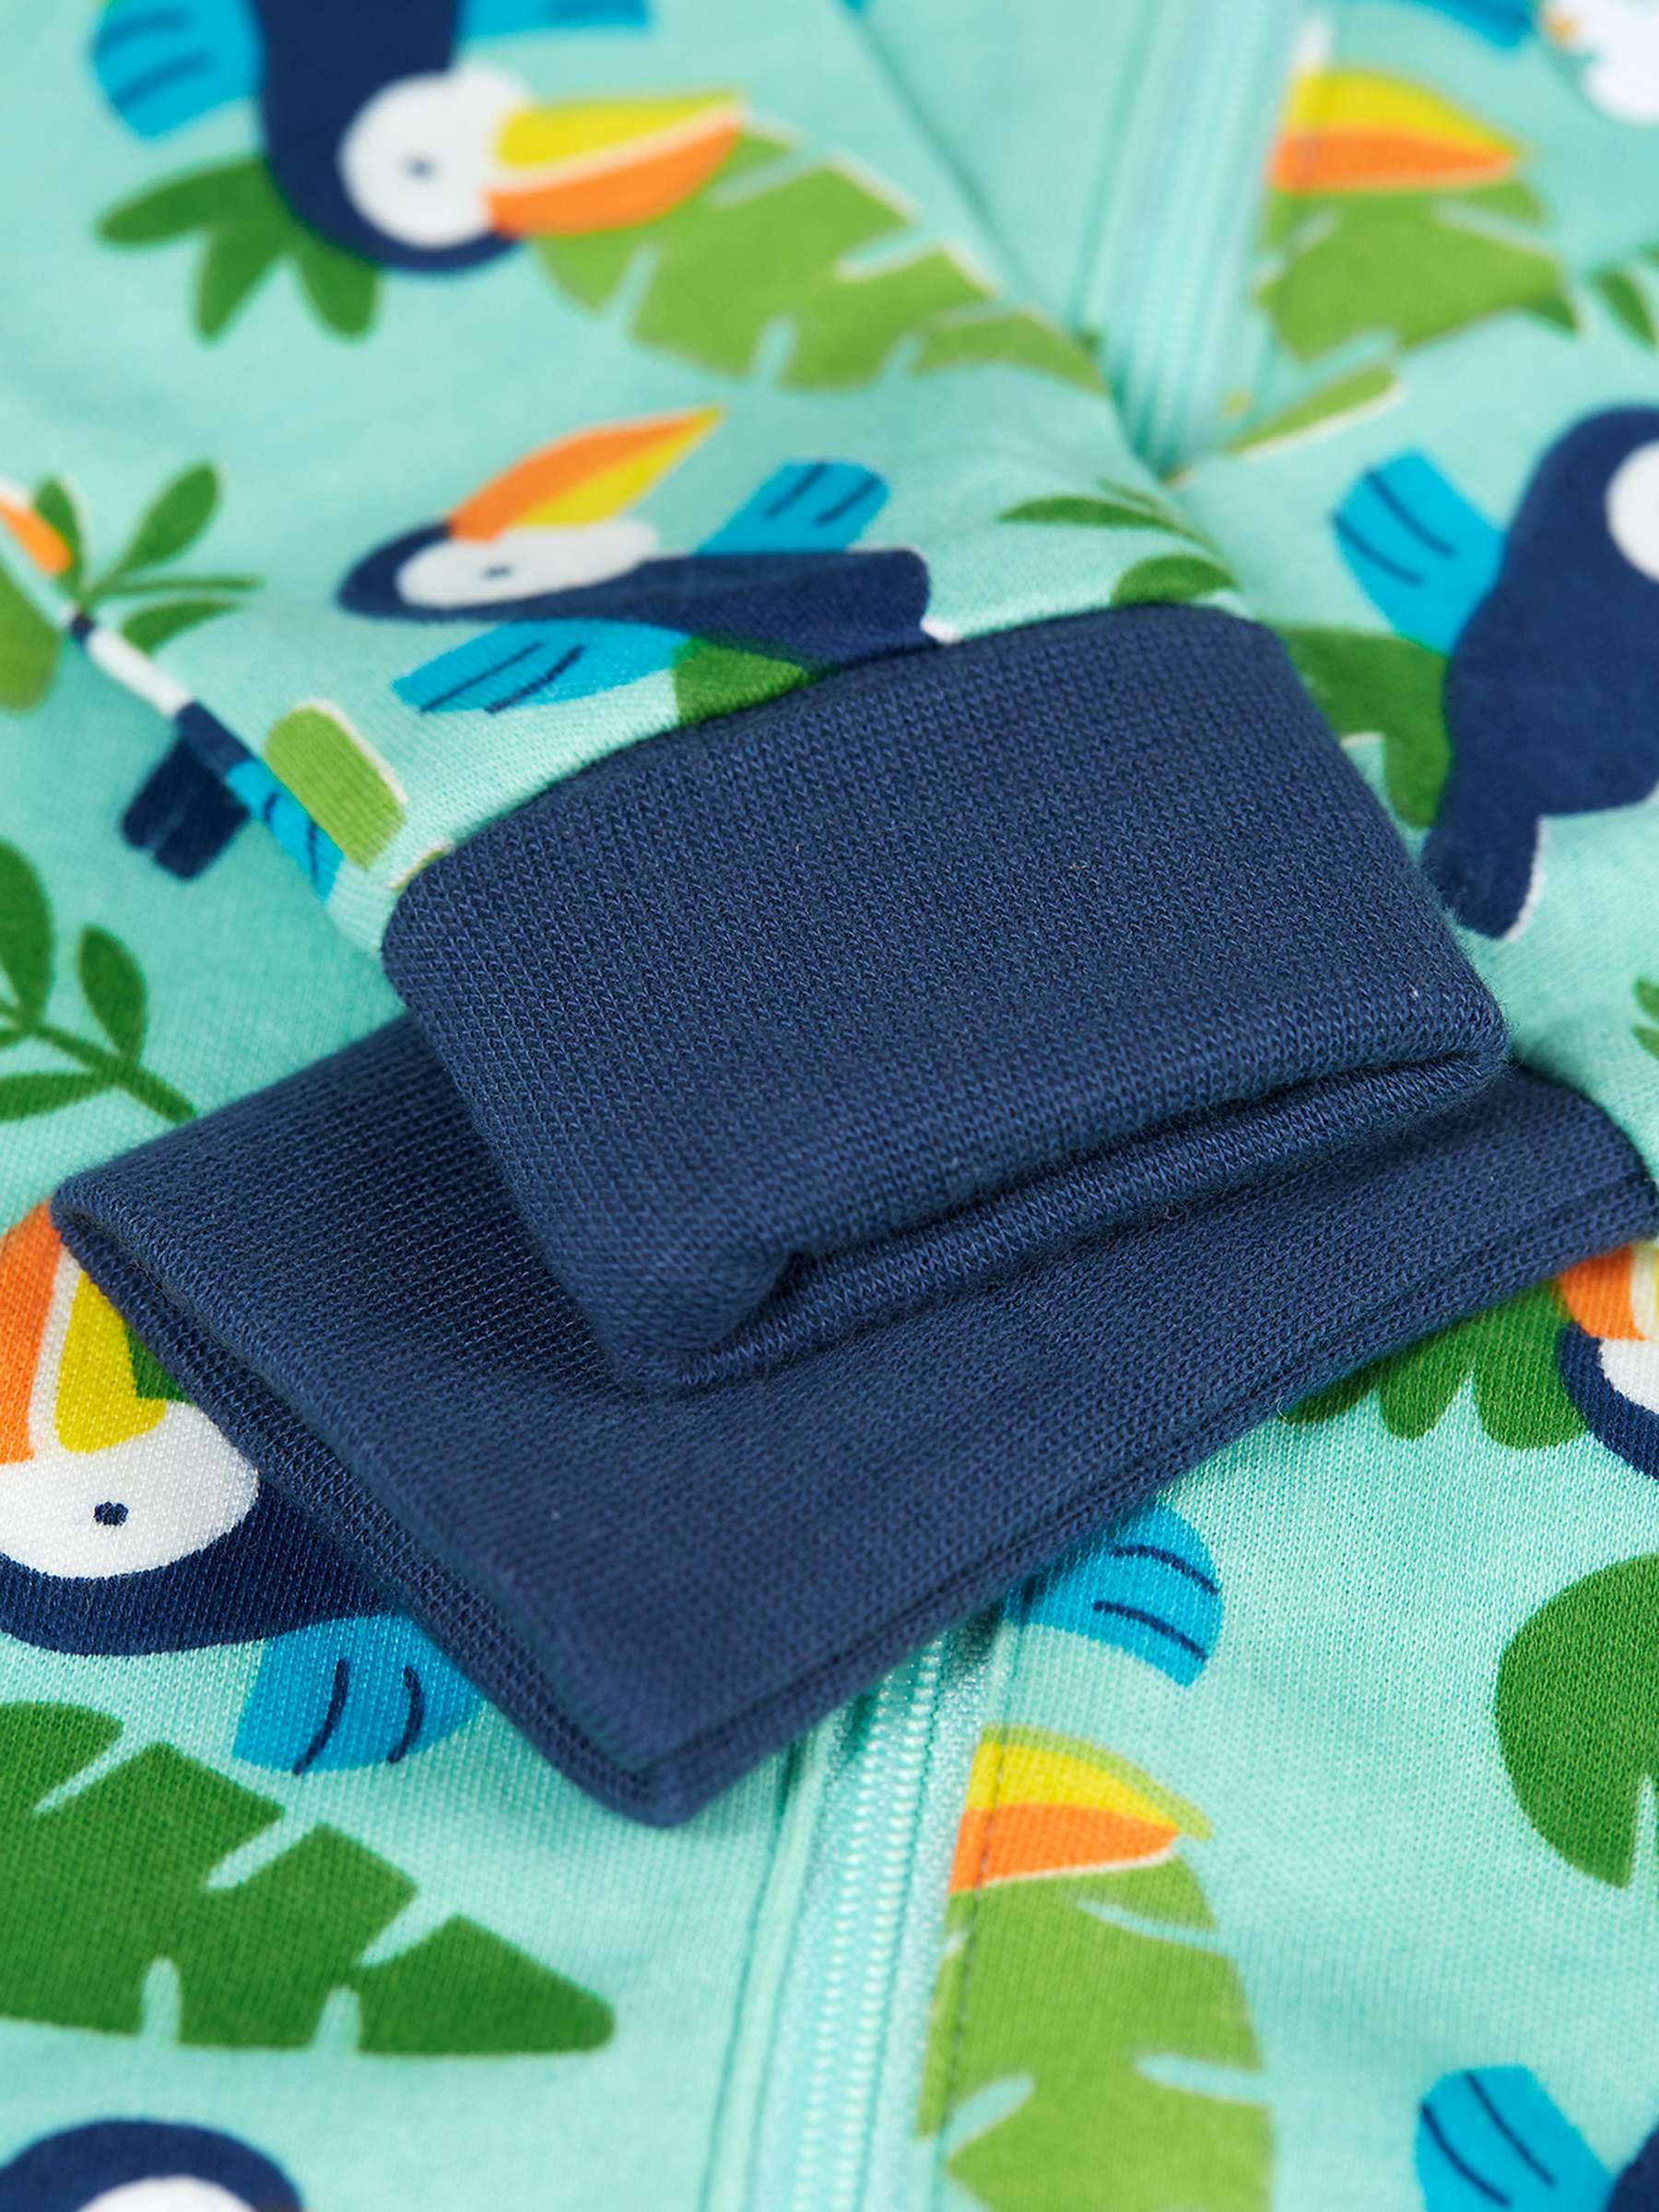 Buy Frugi Baby Zelah Organic Cotton Toucan Time Zip Up All In One, Multi Online at johnlewis.com